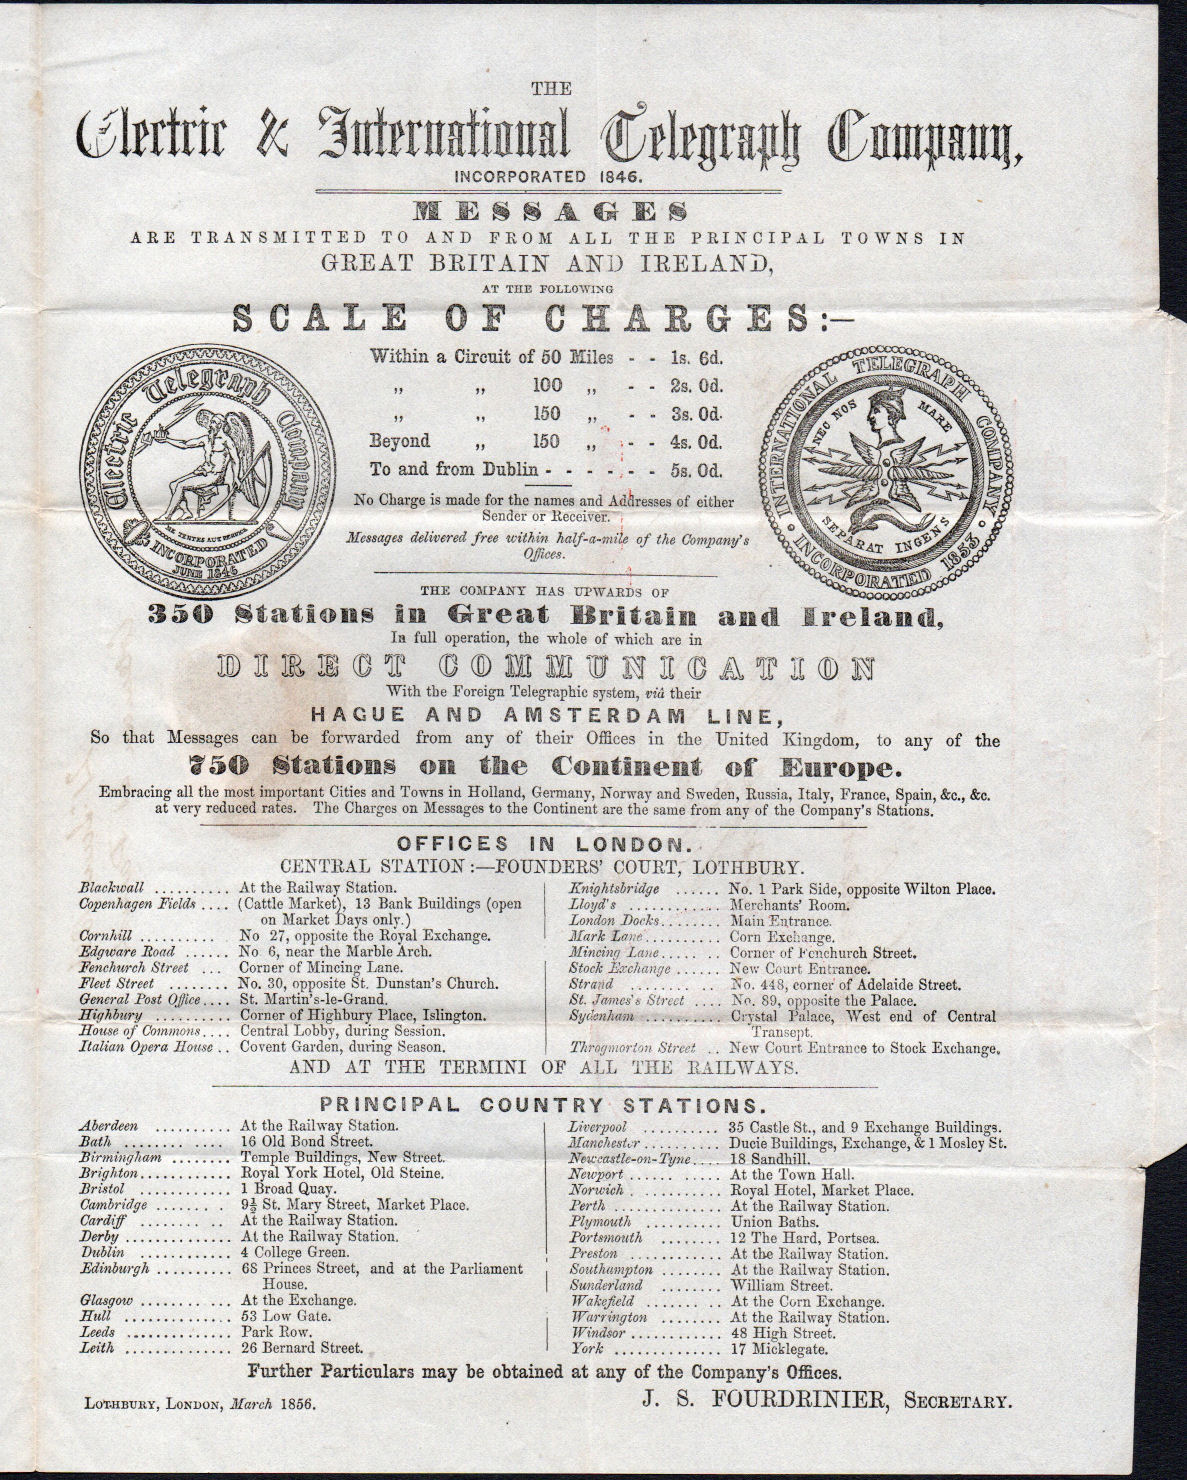 Electric Telegraph Company Stationery 1856 - back.